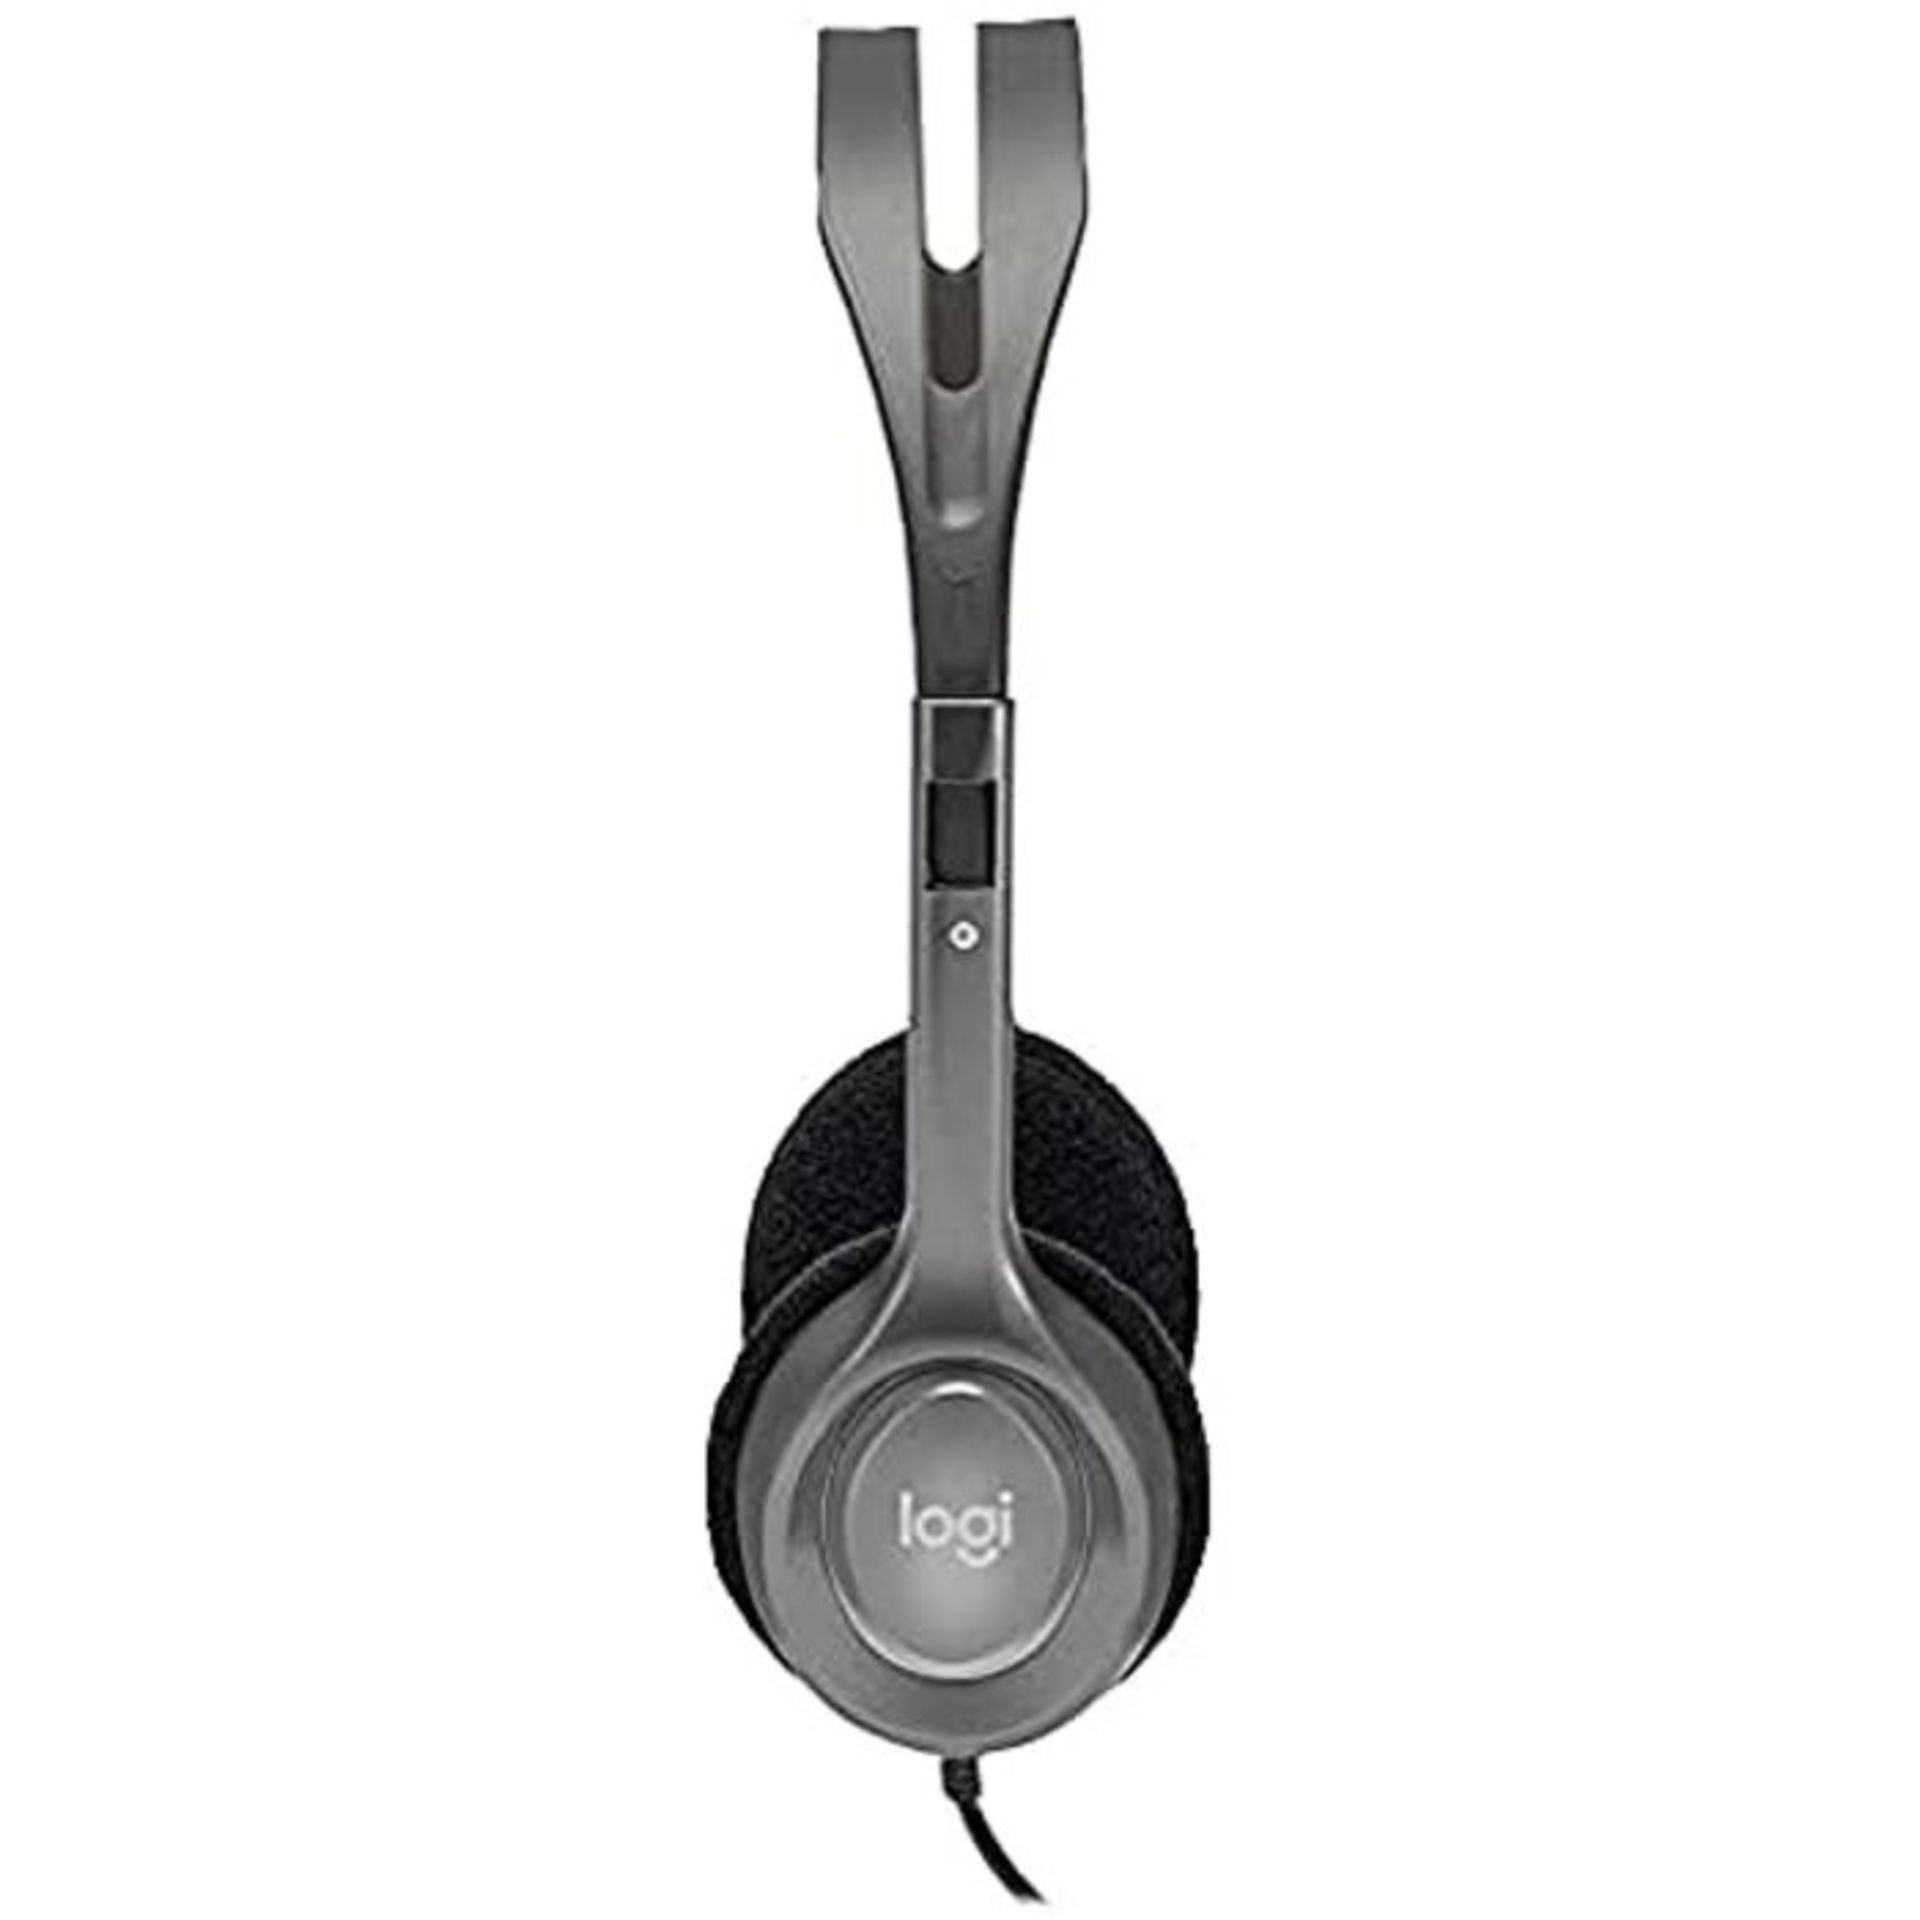 Logitech H110 Wired Headset, Stereo Headphones with Noise-Cancelling Microphone, 3.5-m